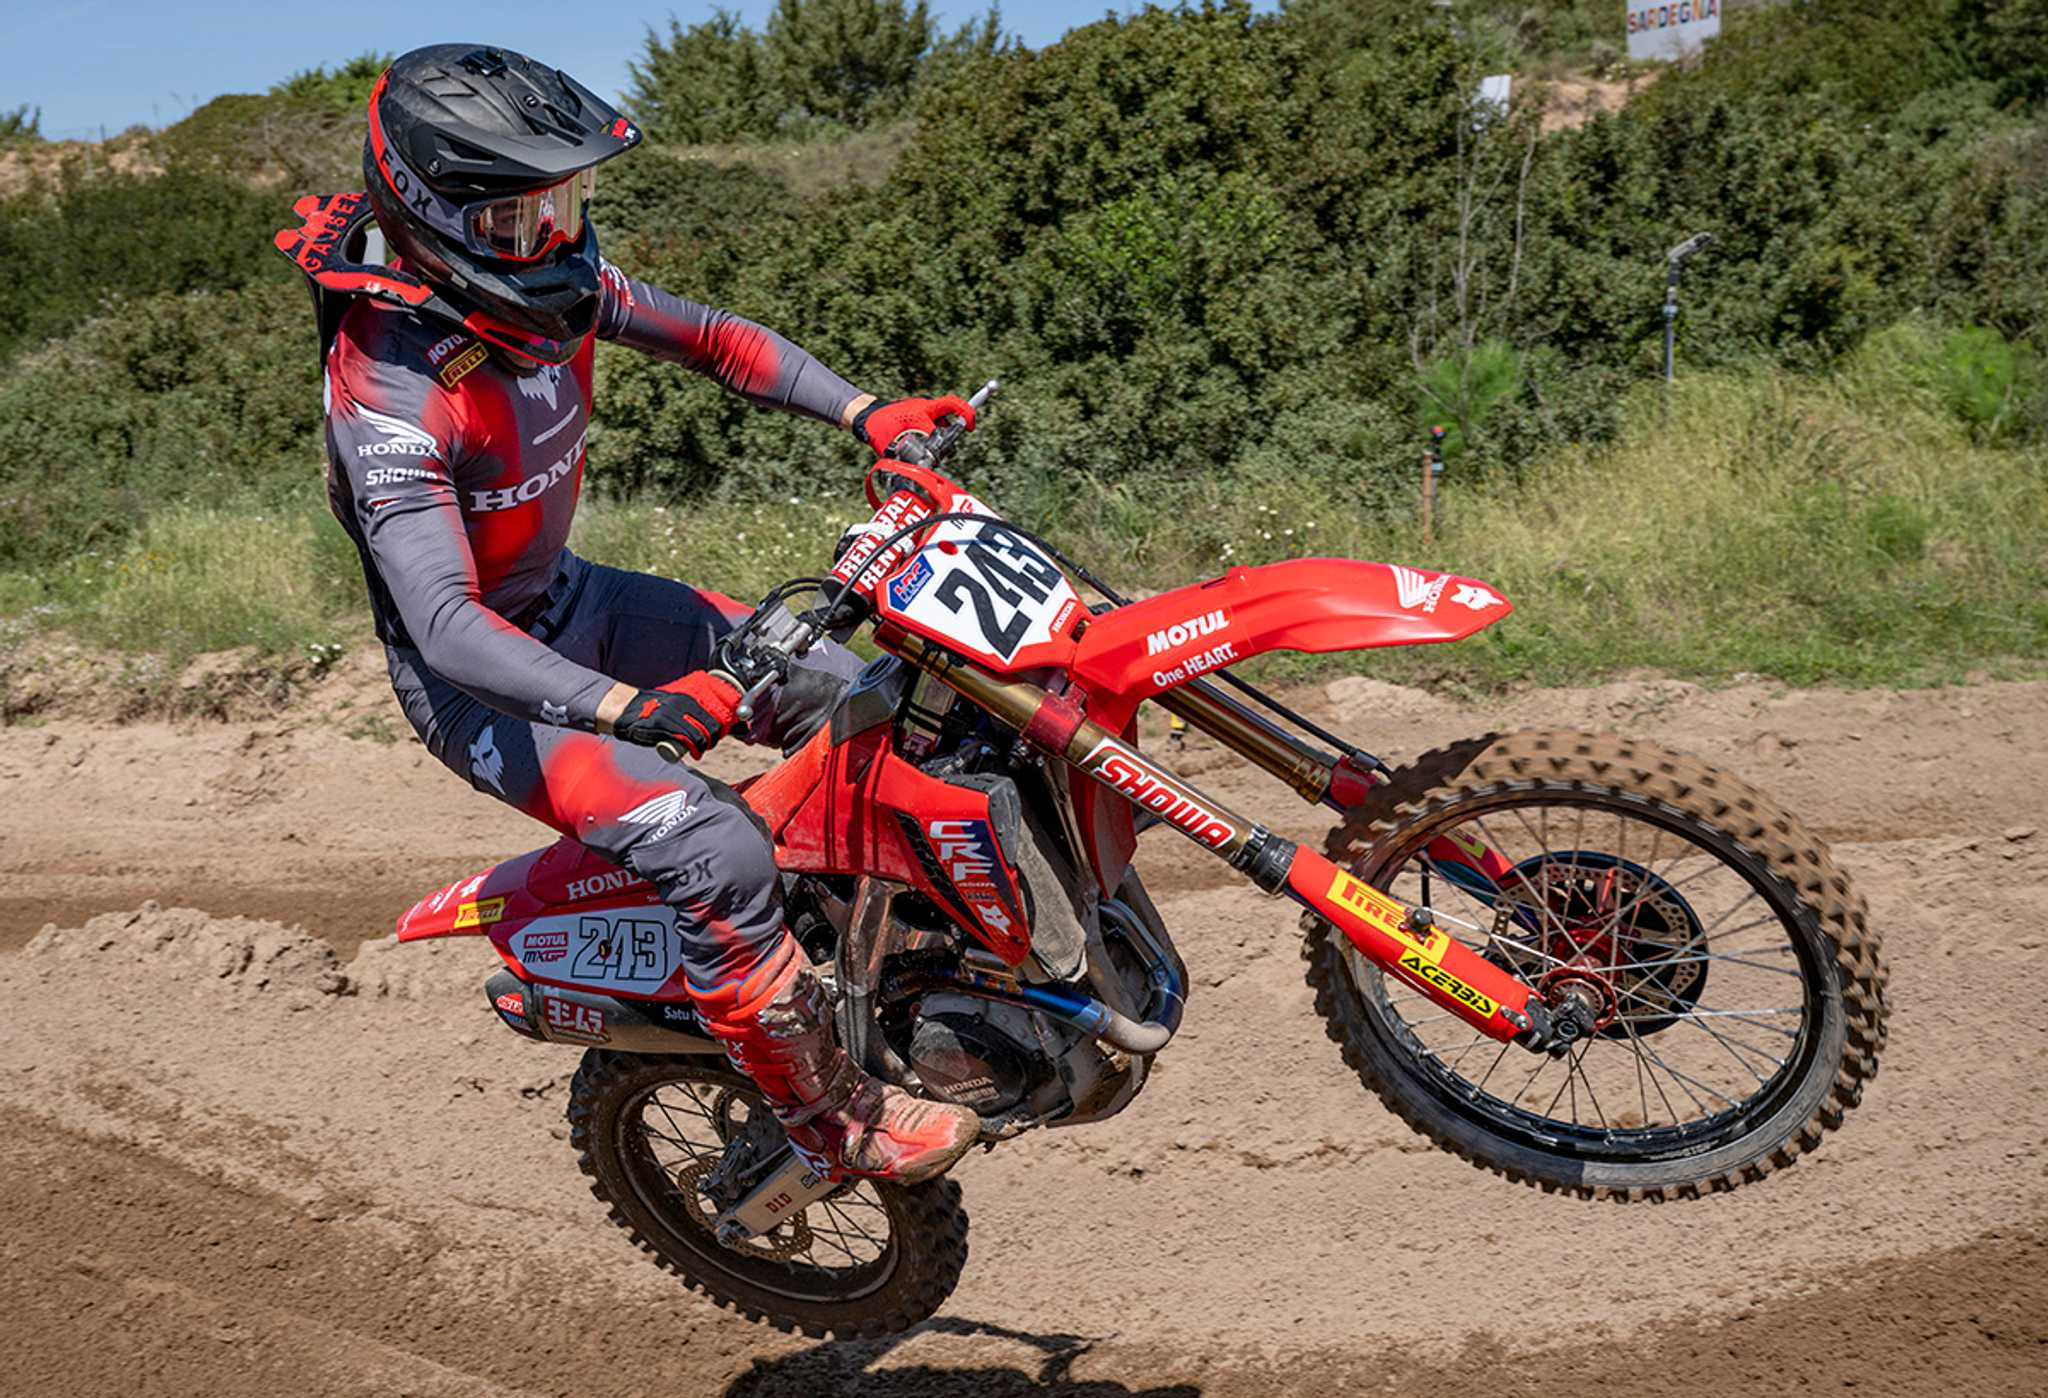 Gajser Quickest in Time Practice image